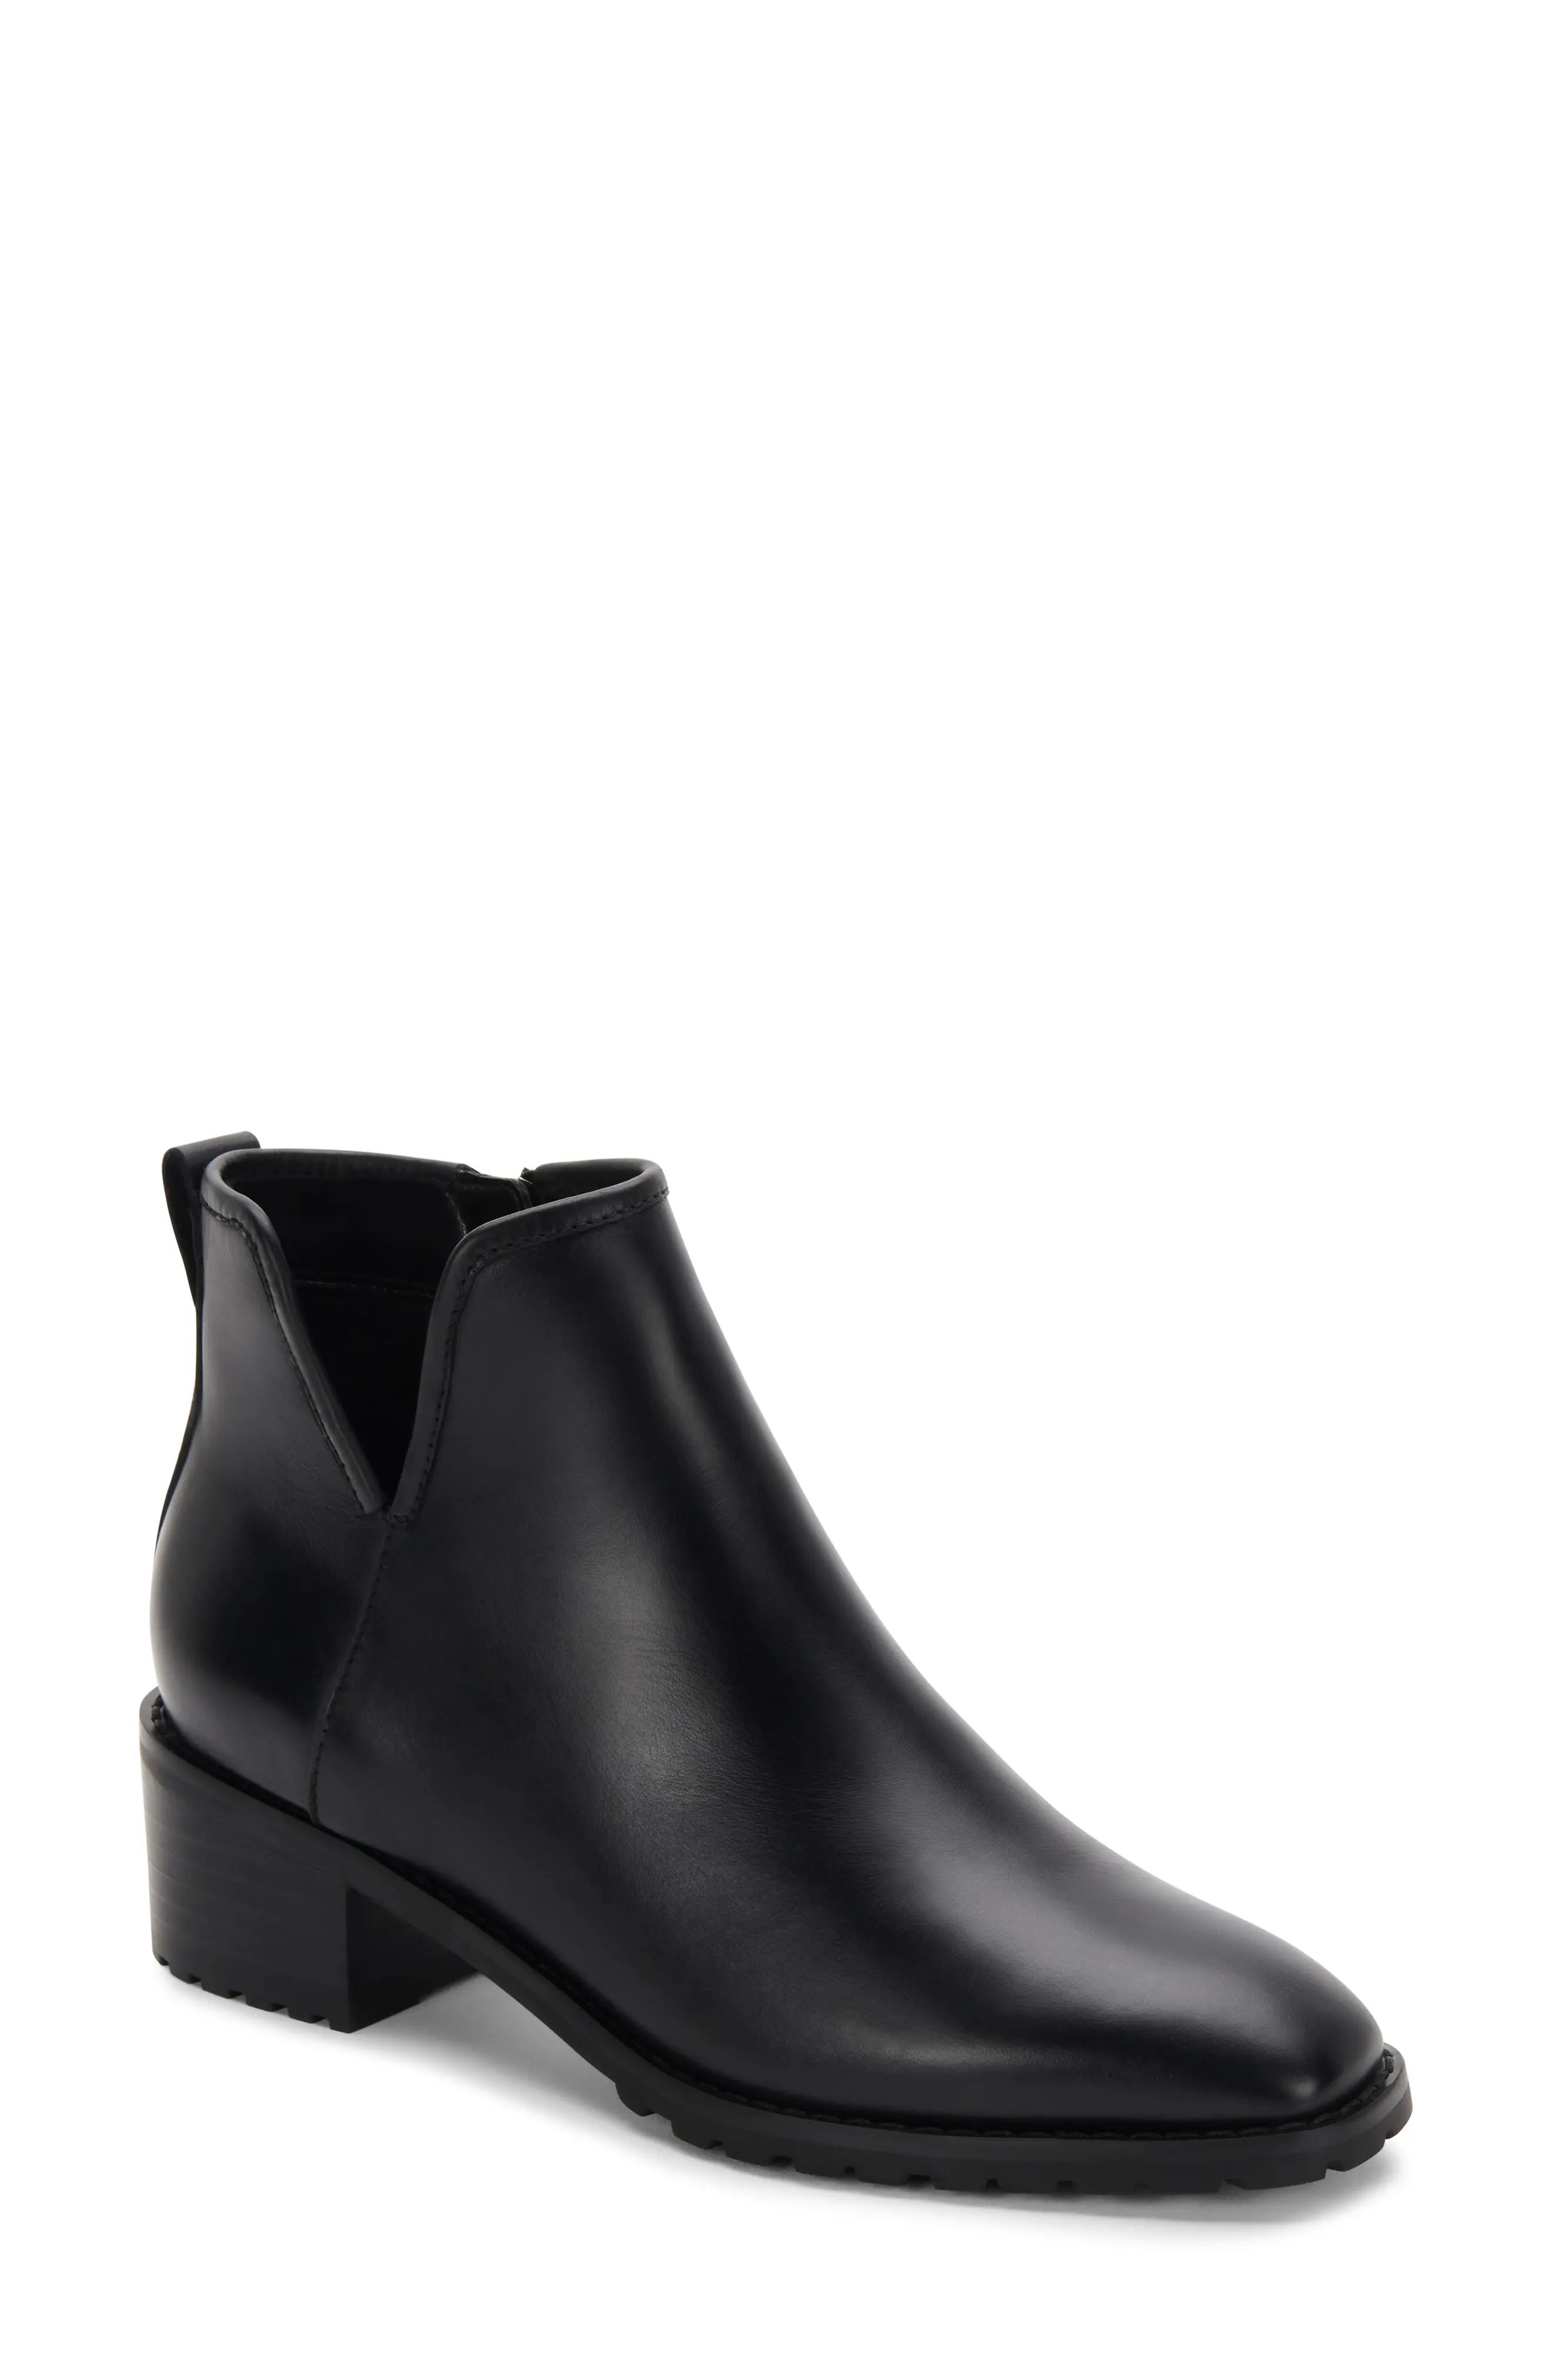 Blondo Sawyer Waterproof Bootie, Size 9.5 in Black Leather at Nordstrom | Nordstrom